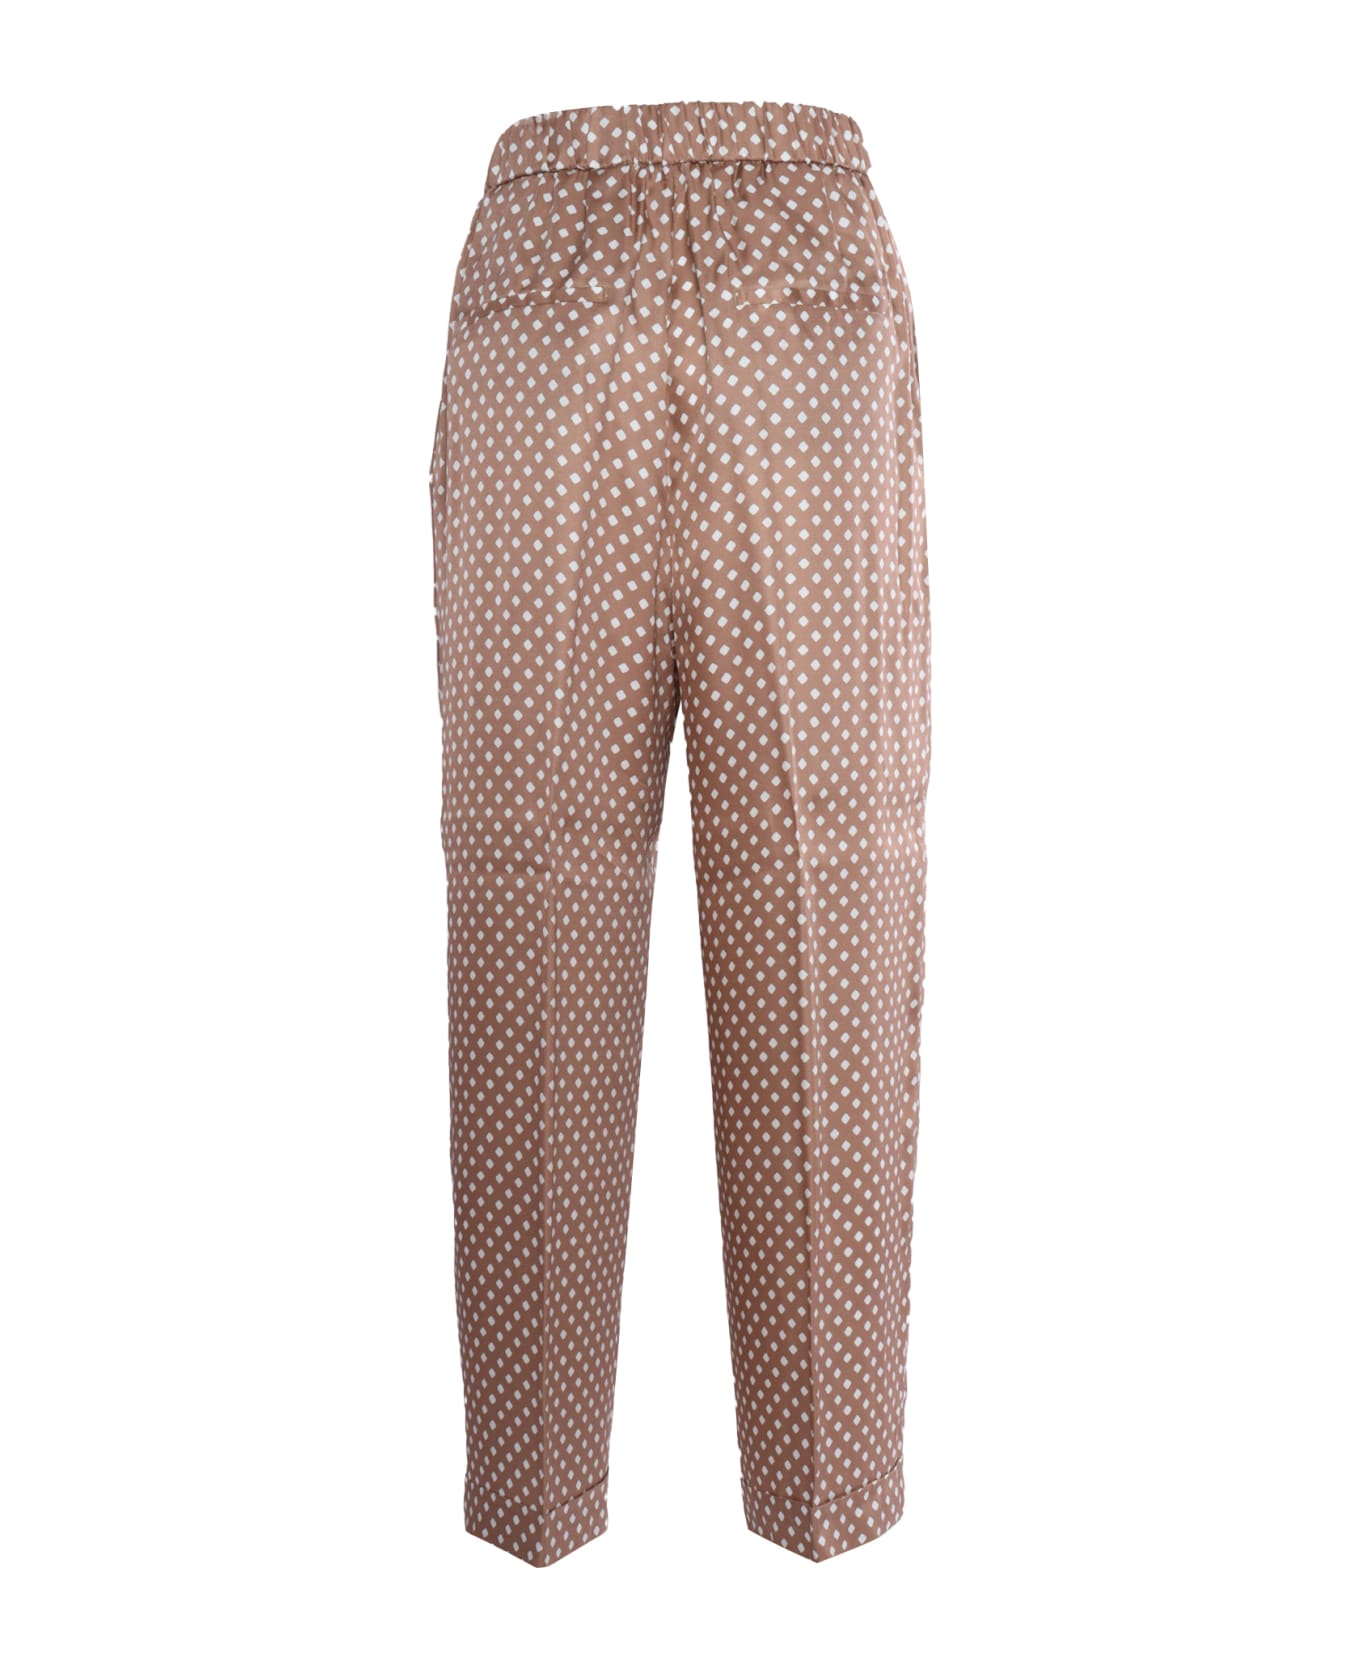 Peserico Brown Trousers With Polka Dots - BROWN ボトムス